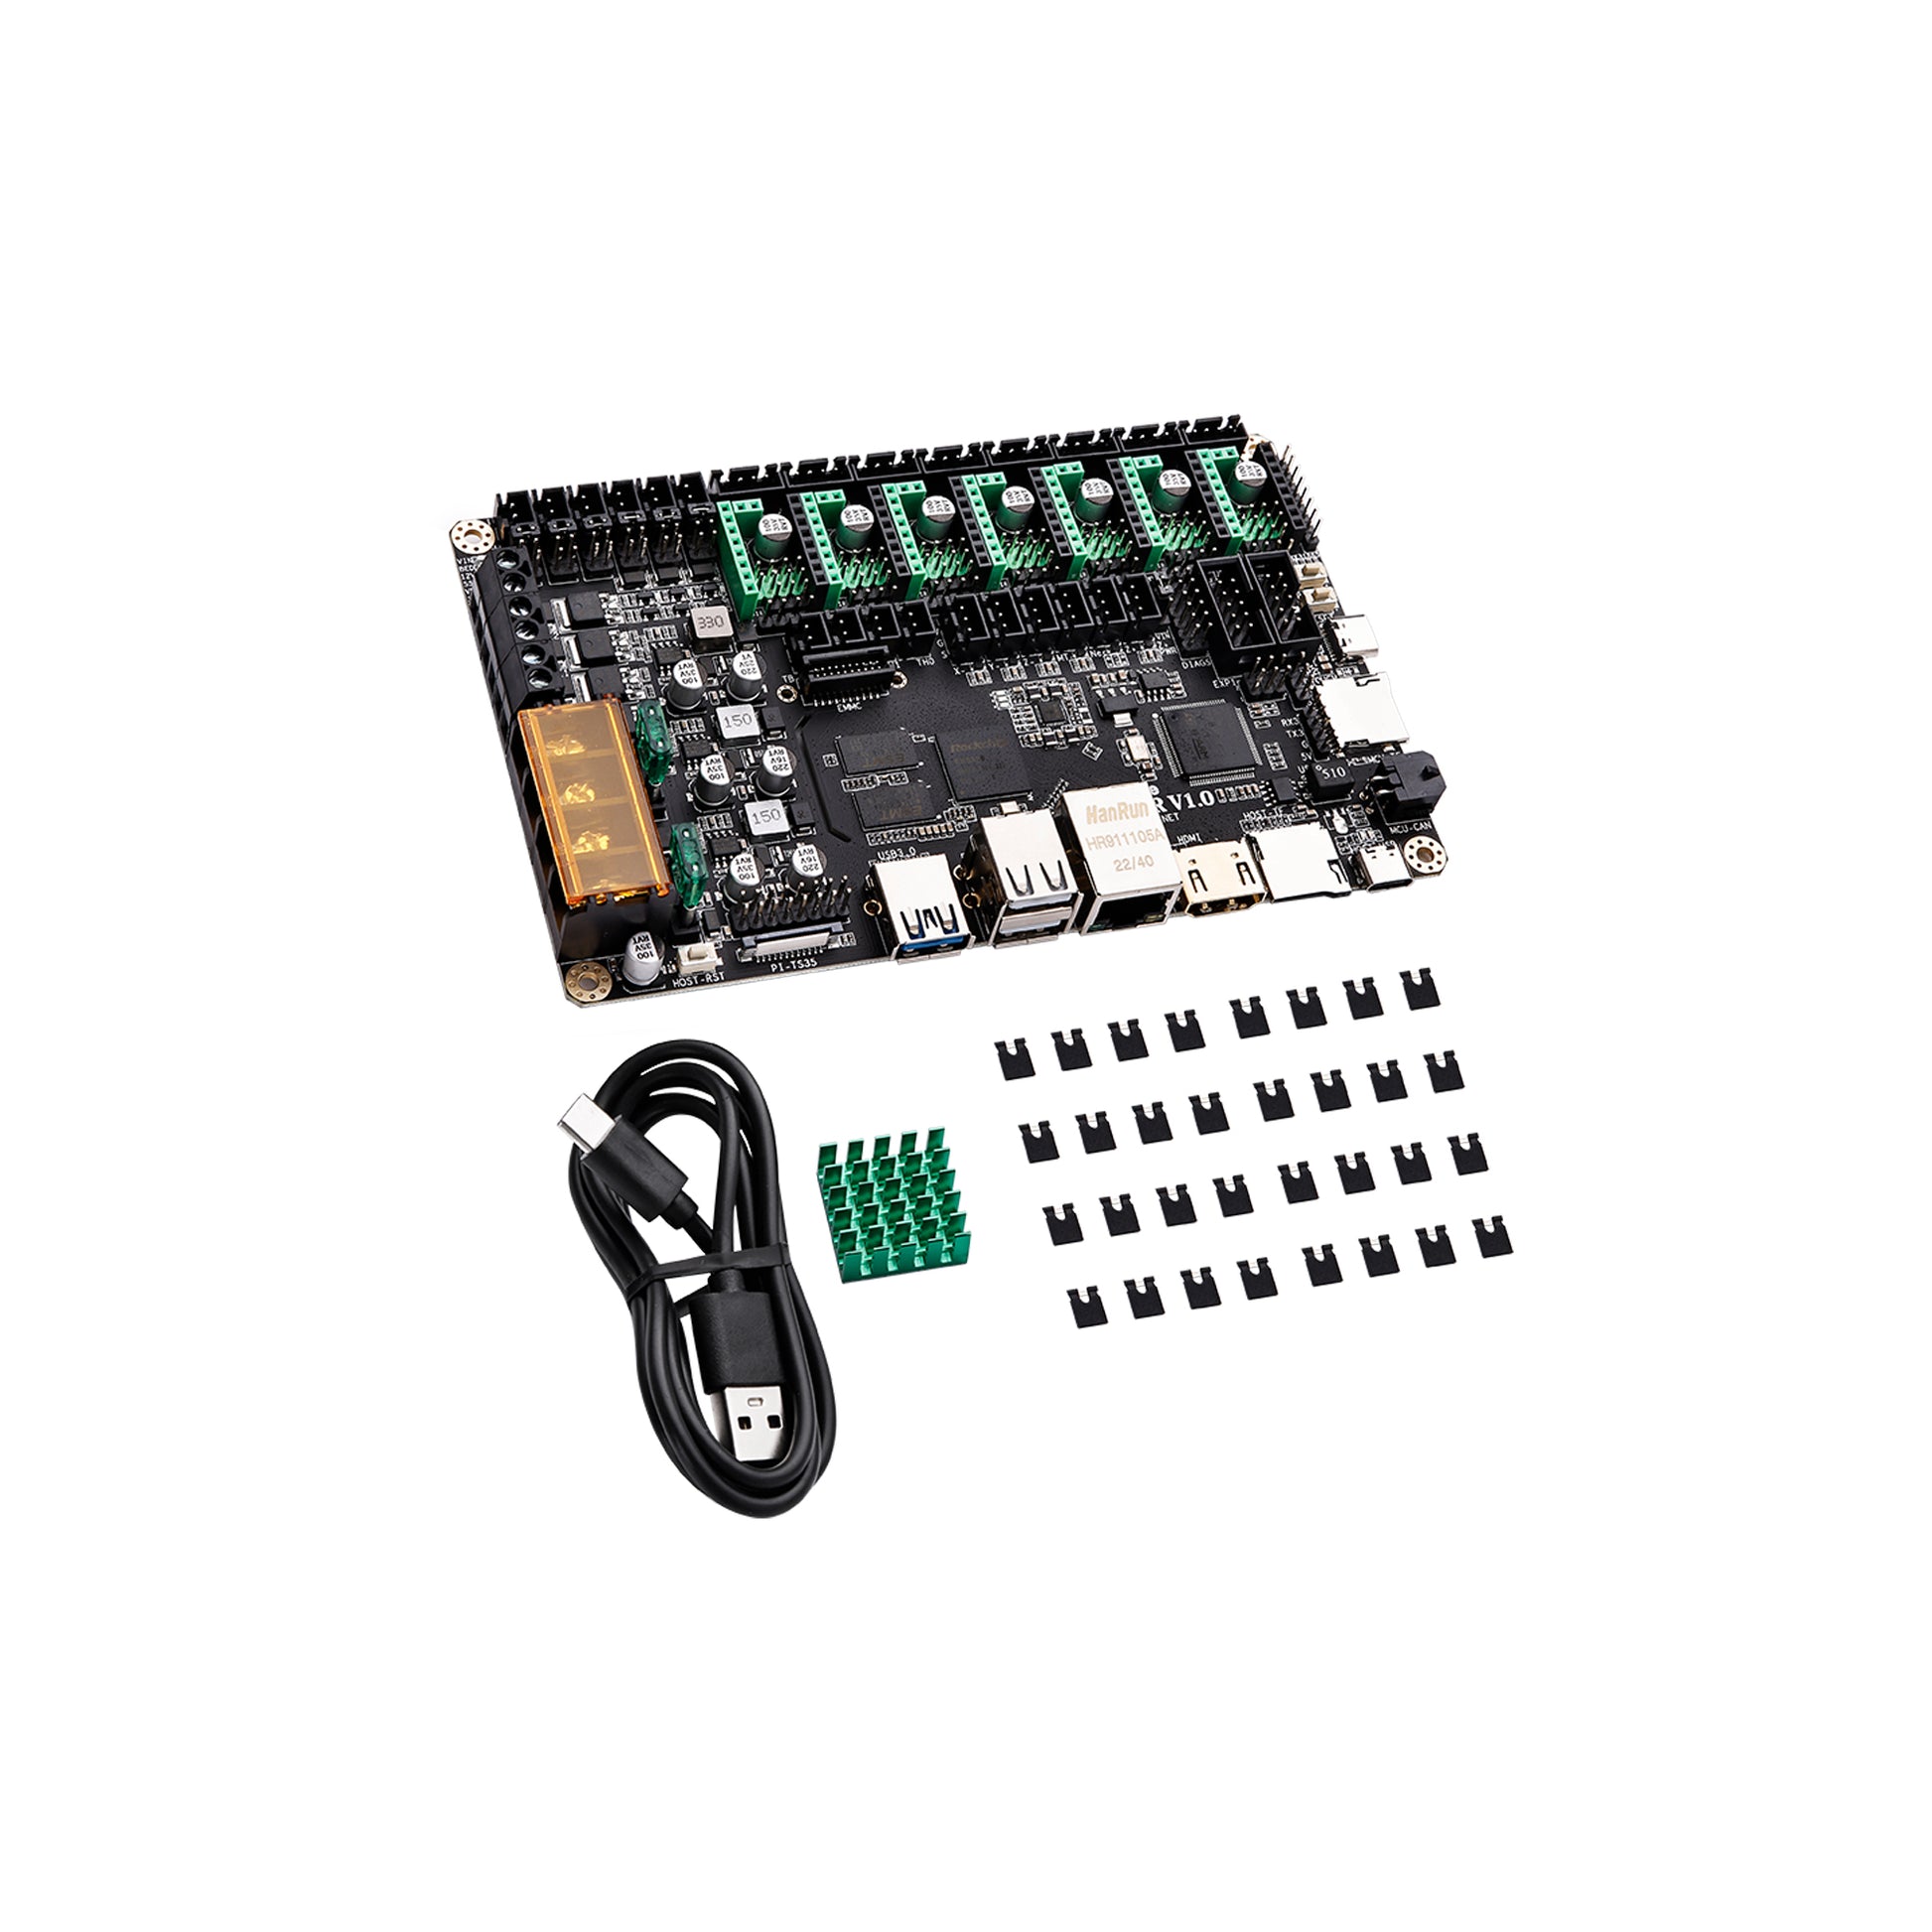 MKS V1.0]All-in-one for Firmware, Configurable – Makerbase